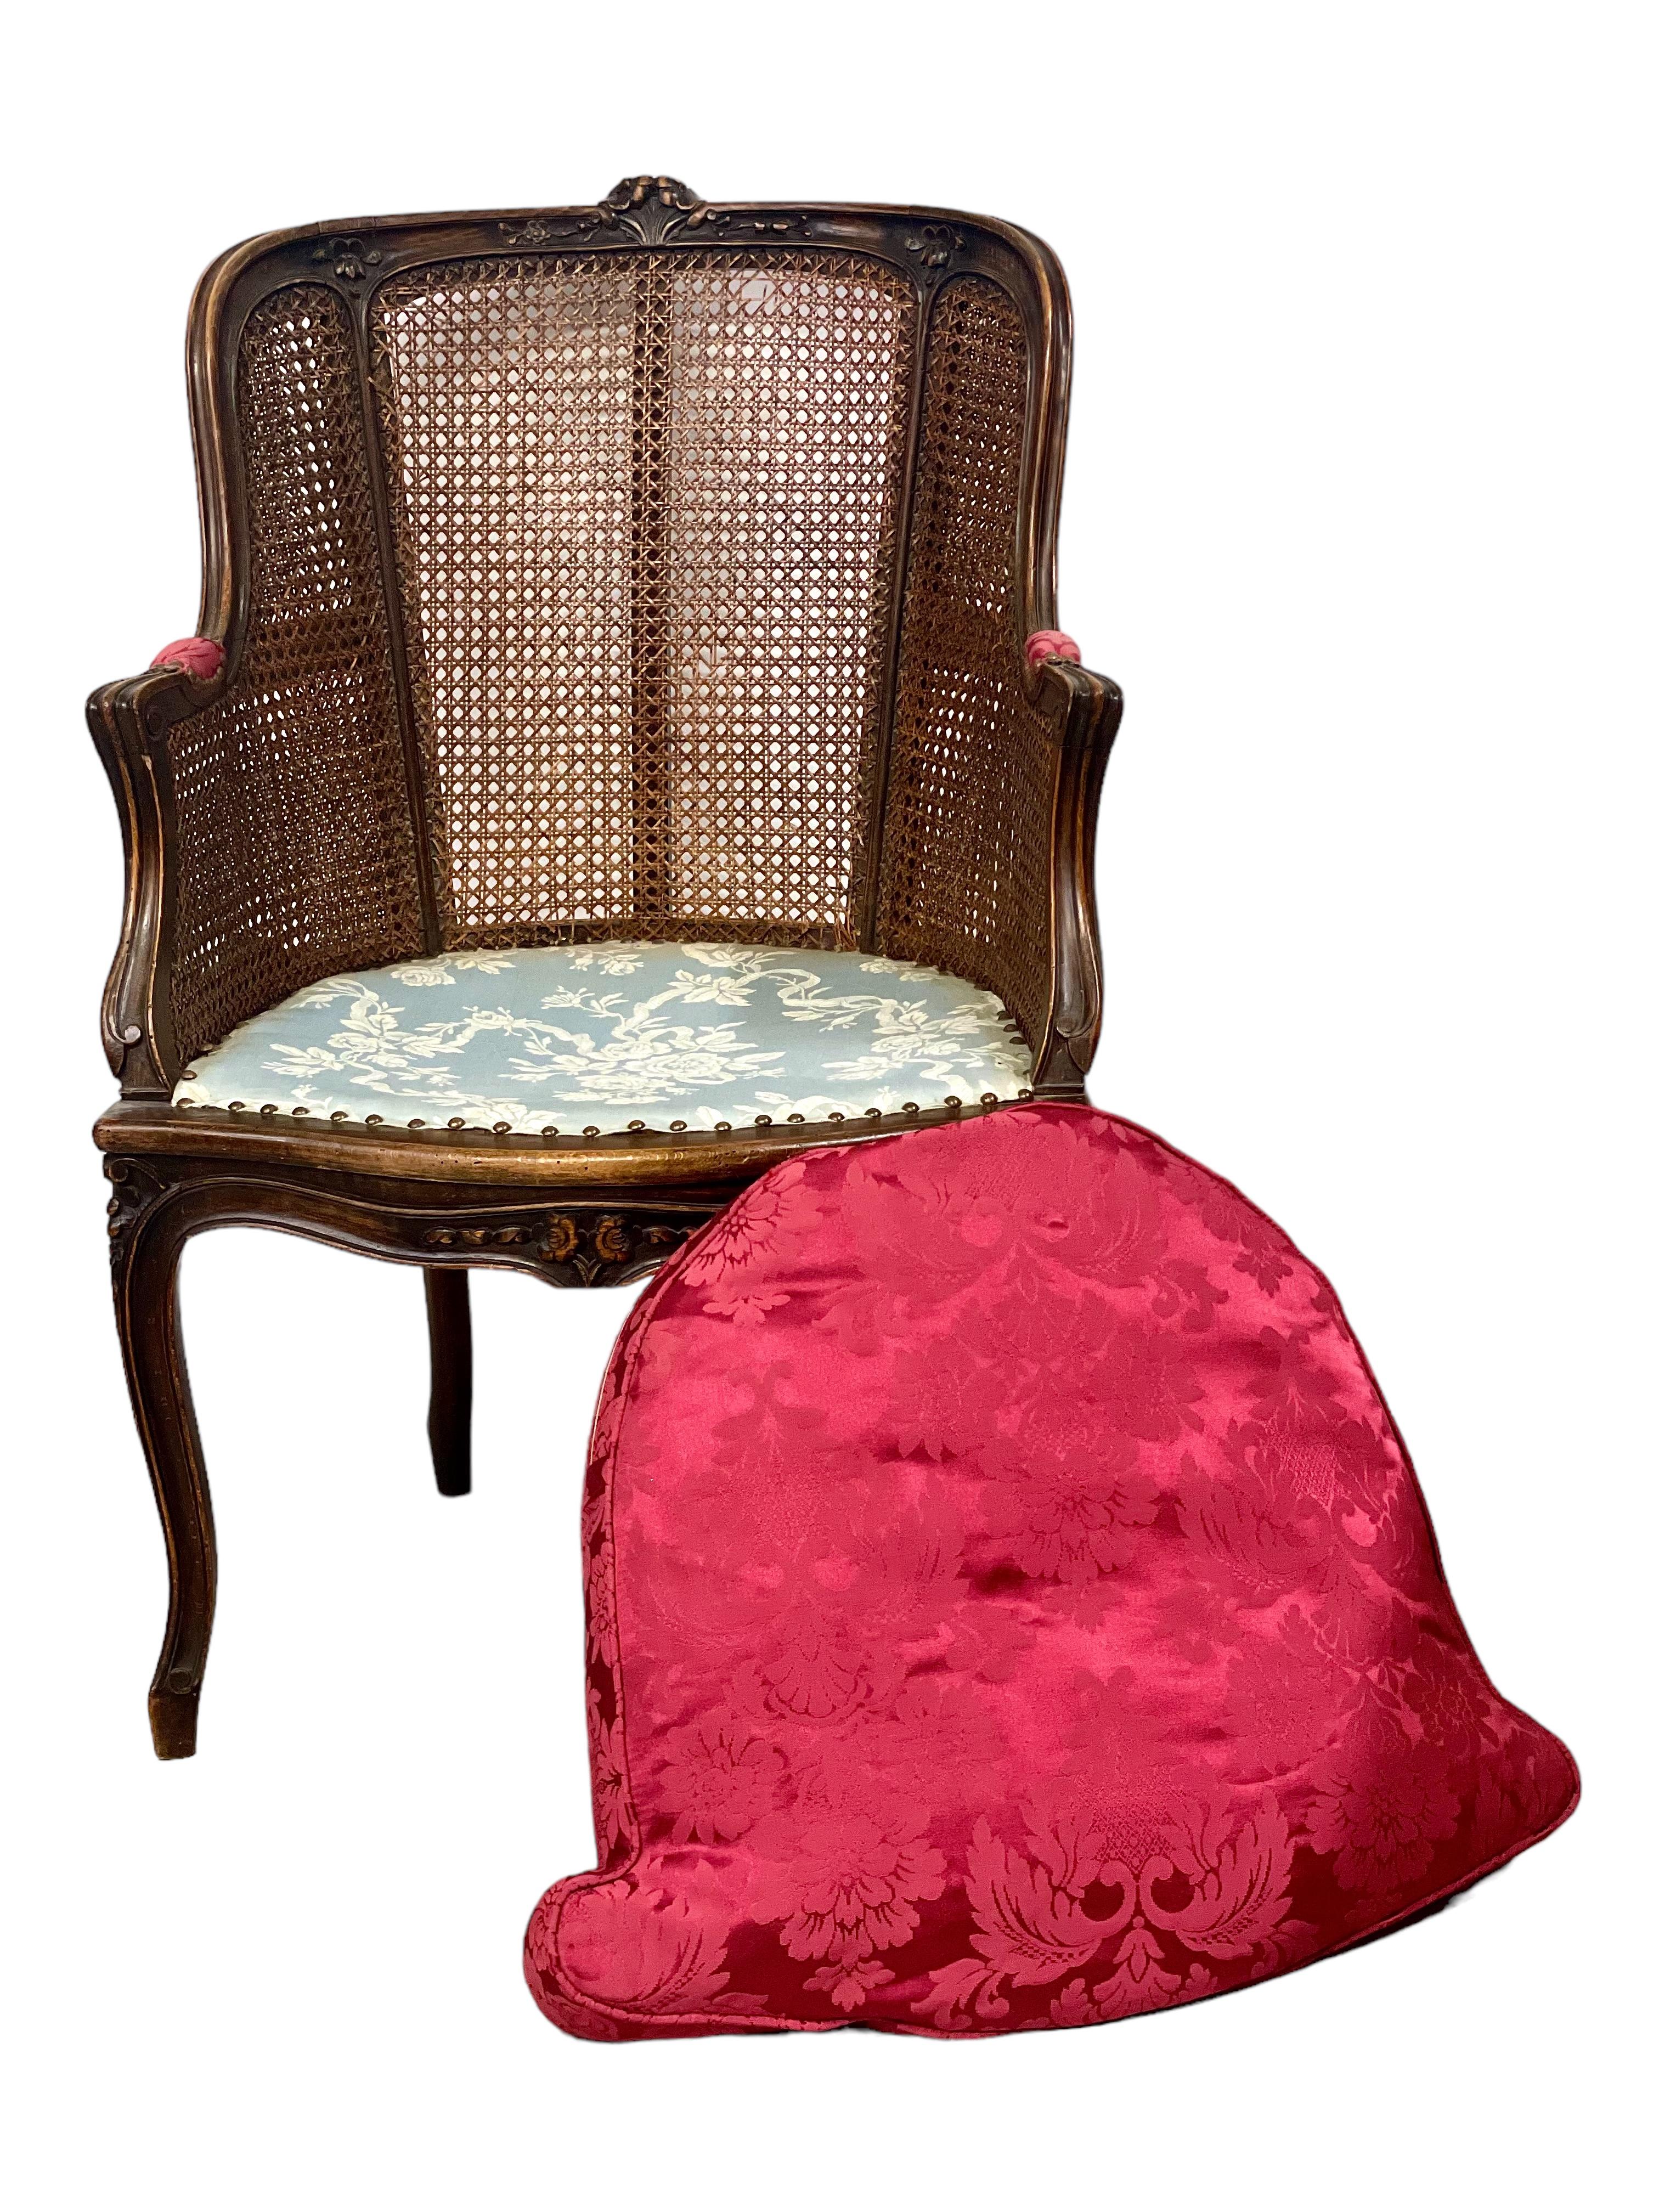 A stylish Louis XV-style caned Bergère armchair in natural wood, featuring a generously wide seat with detachable crimson plush cushion woven with an exuberant floral design. The shaped top rail has been beautifully embellished with exquisite floral